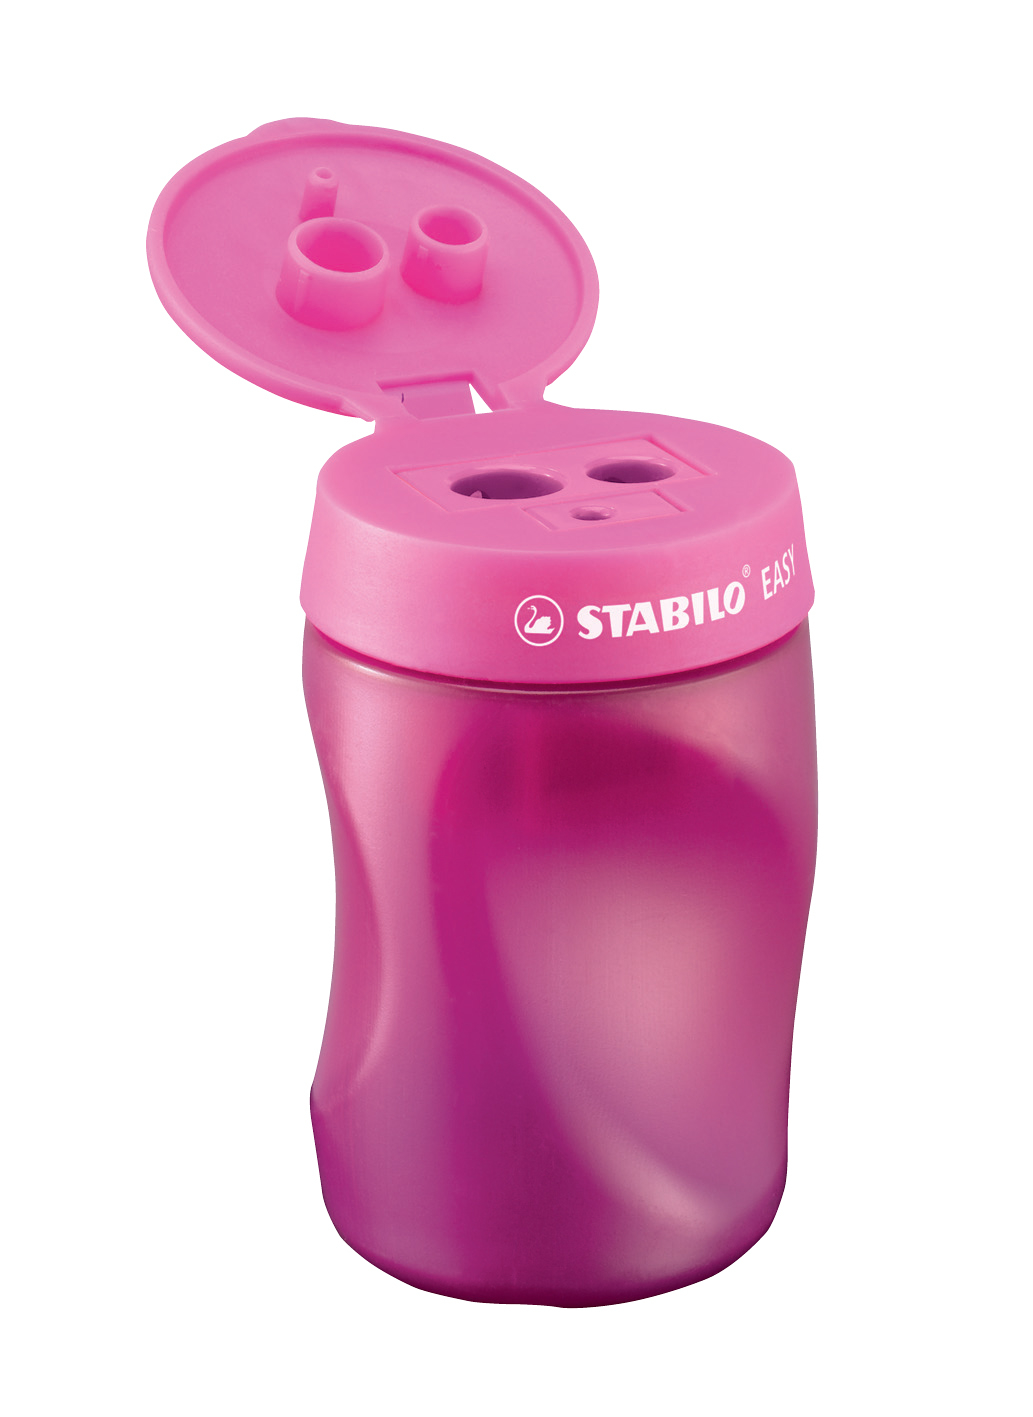 STABILO Taille-crayon Easy L 4501/1 pink pink